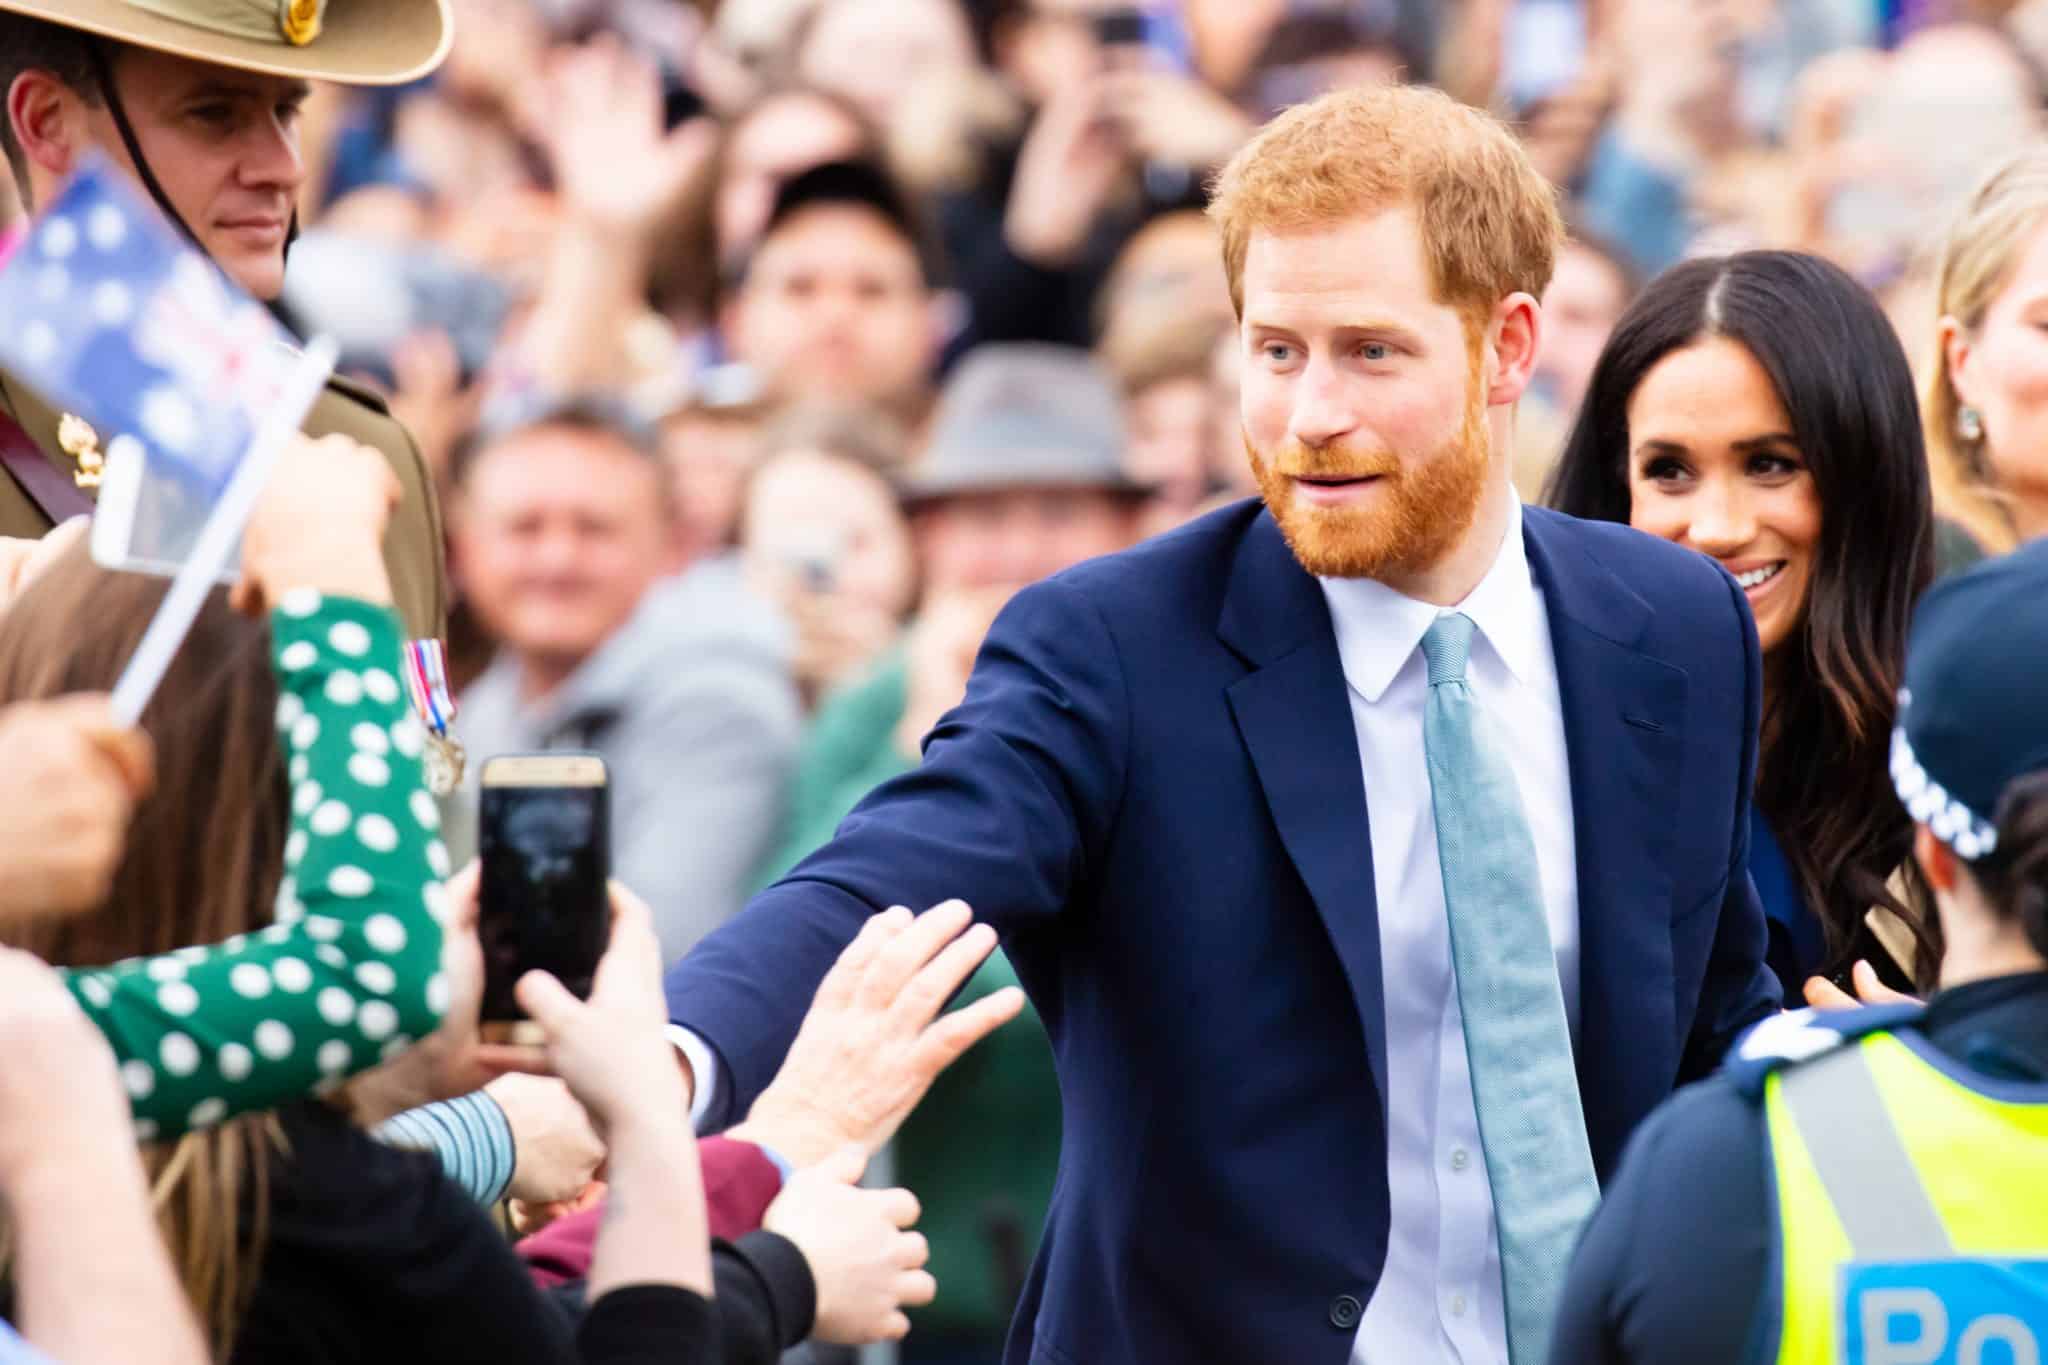 Petition: Prince Harry Sells his Hunting Rifles and Quits Hunting